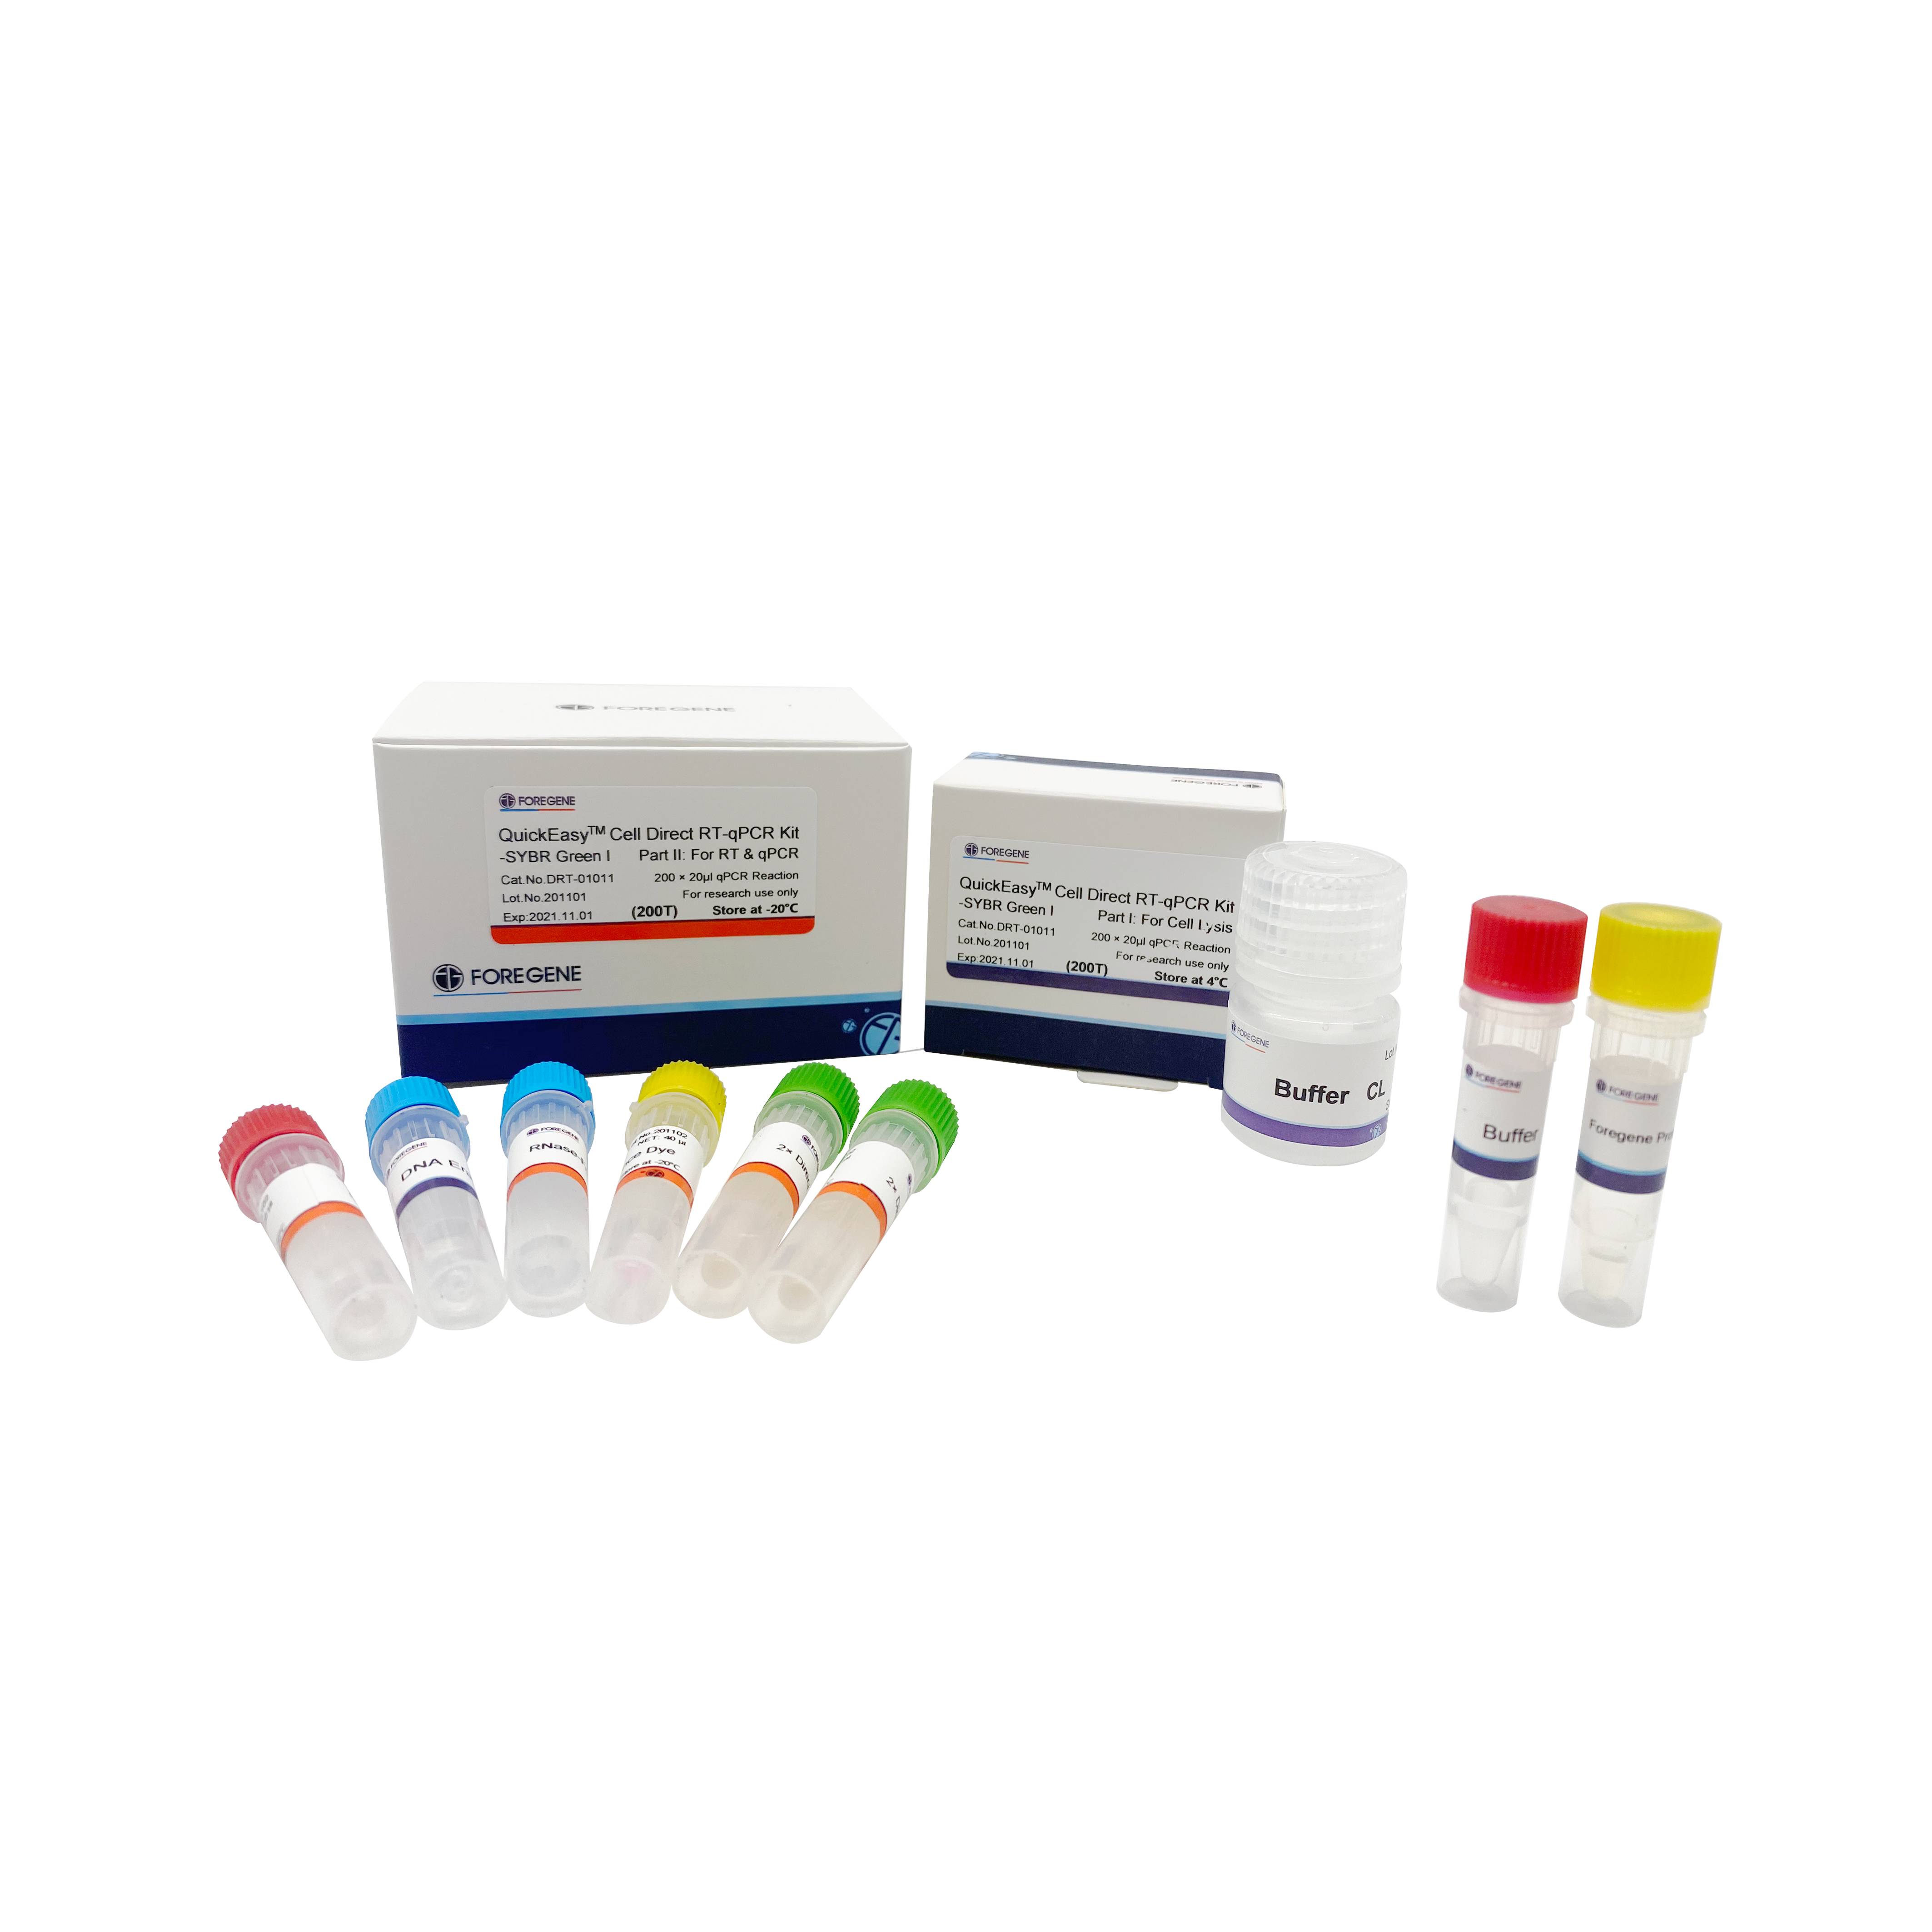 Cell Direct RT qPCR Kit—SYBR GREEN I Direct Cell Lysis Cell Ready One-step qRT-PCR Kit Gambar Unggulan